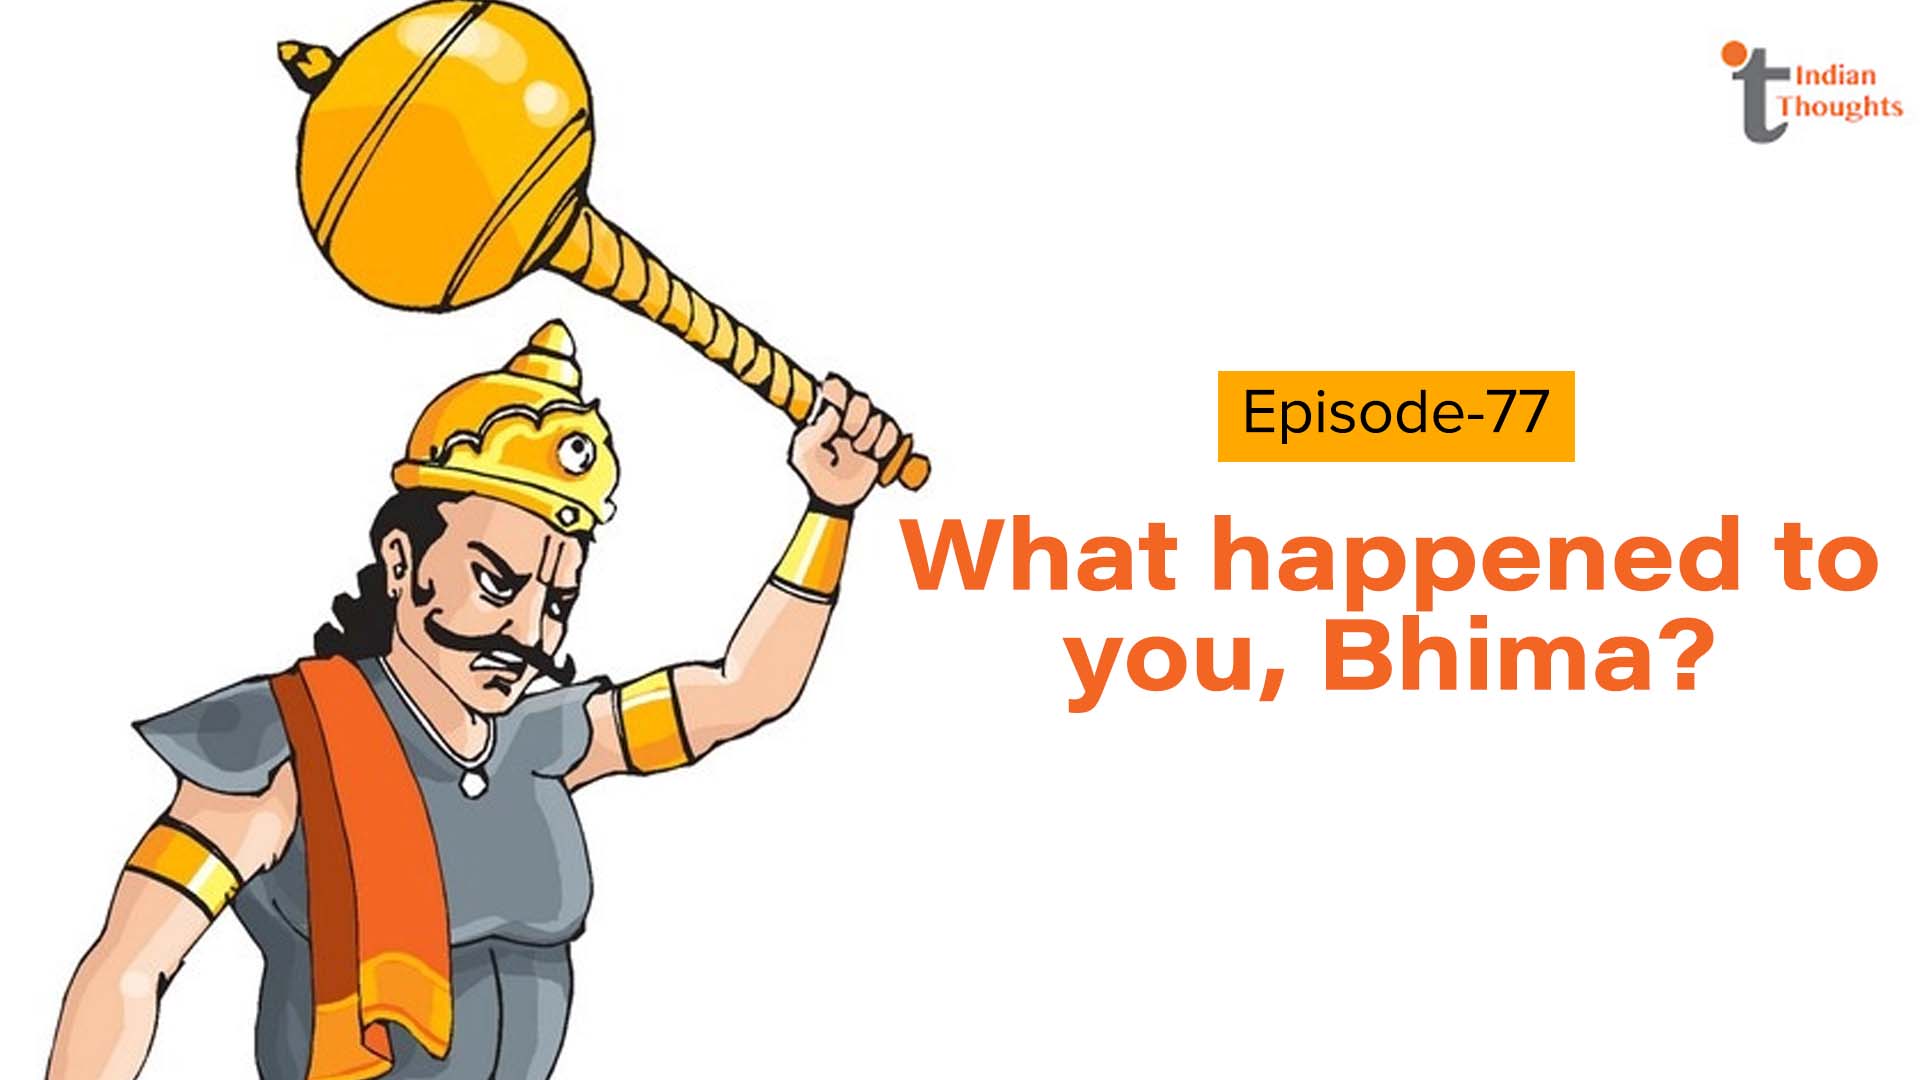 What happened to you, Bhima?